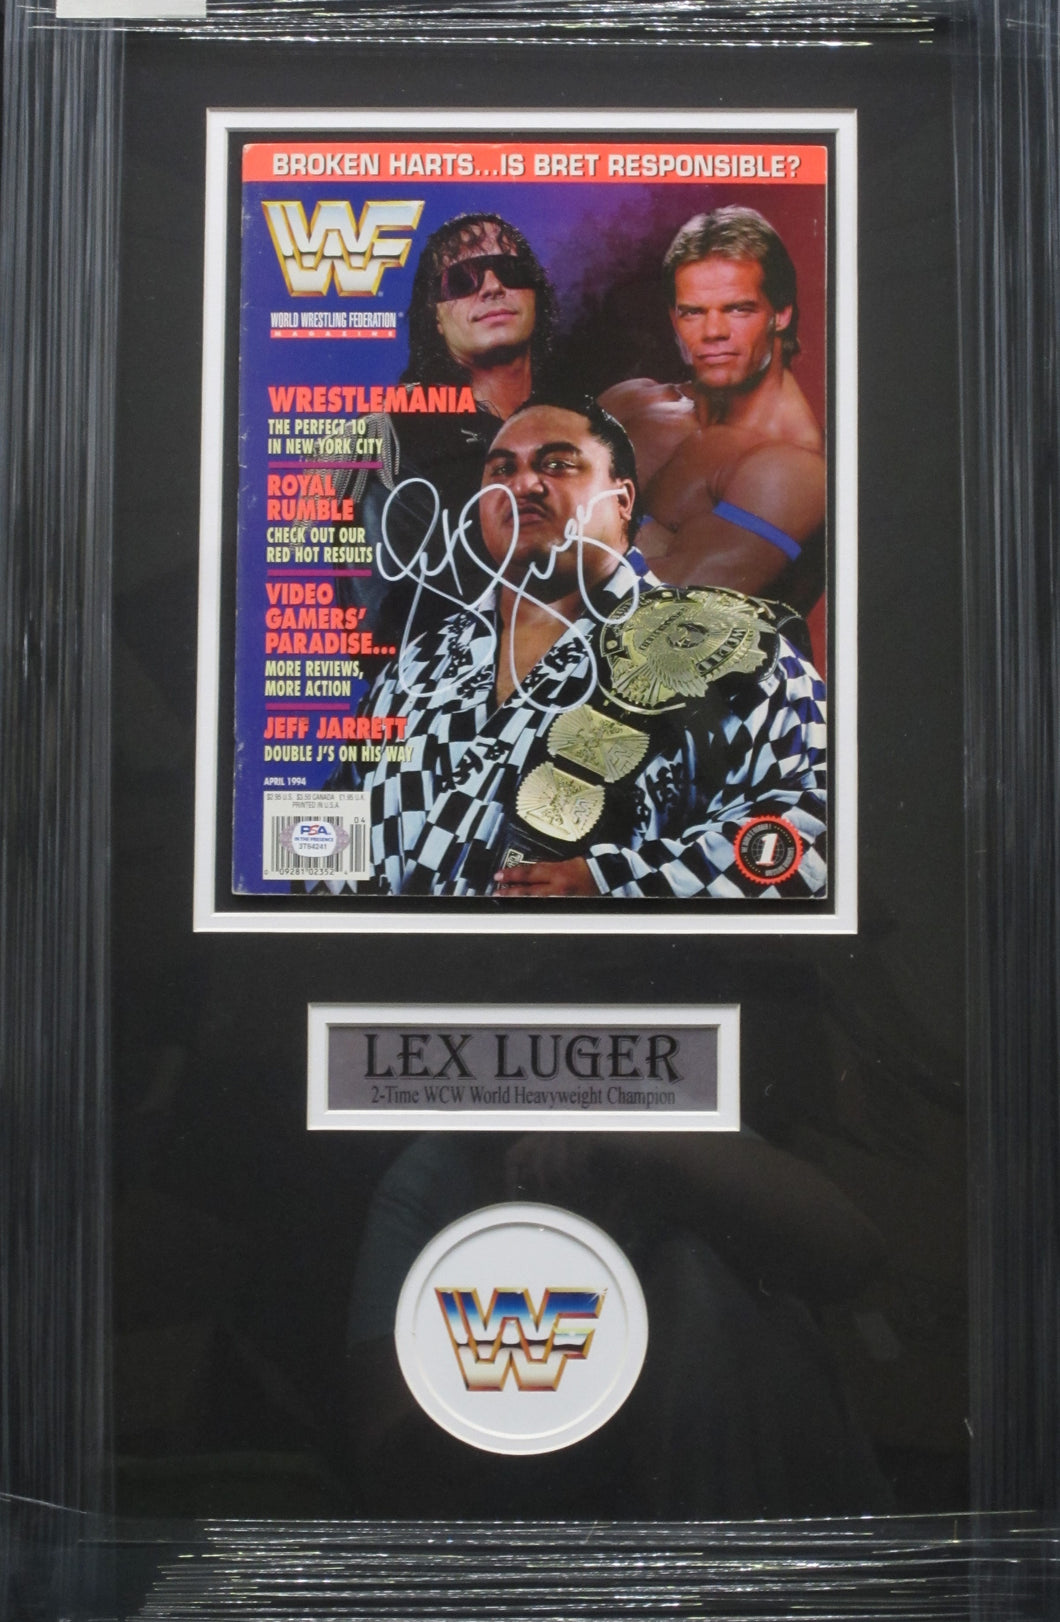 American Professional Wrestler Lex Luger Signed 1994 WWF Magazine Framed & Matted with PSA COA